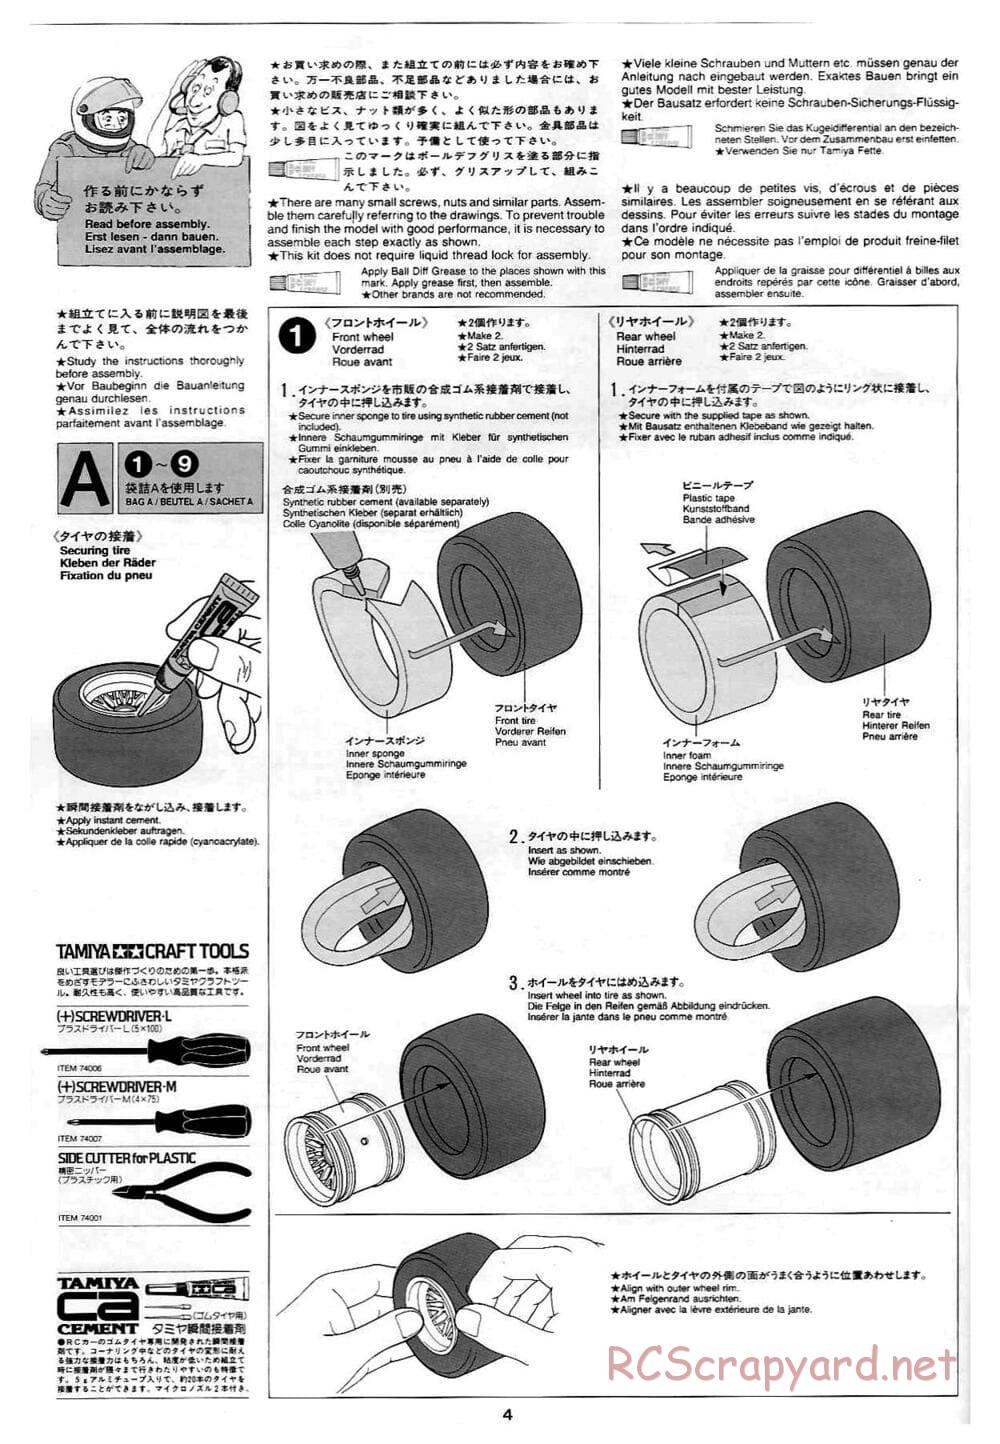 Tamiya - Toyota GT-One TS020 - F103RS Chassis - Manual - Page 4